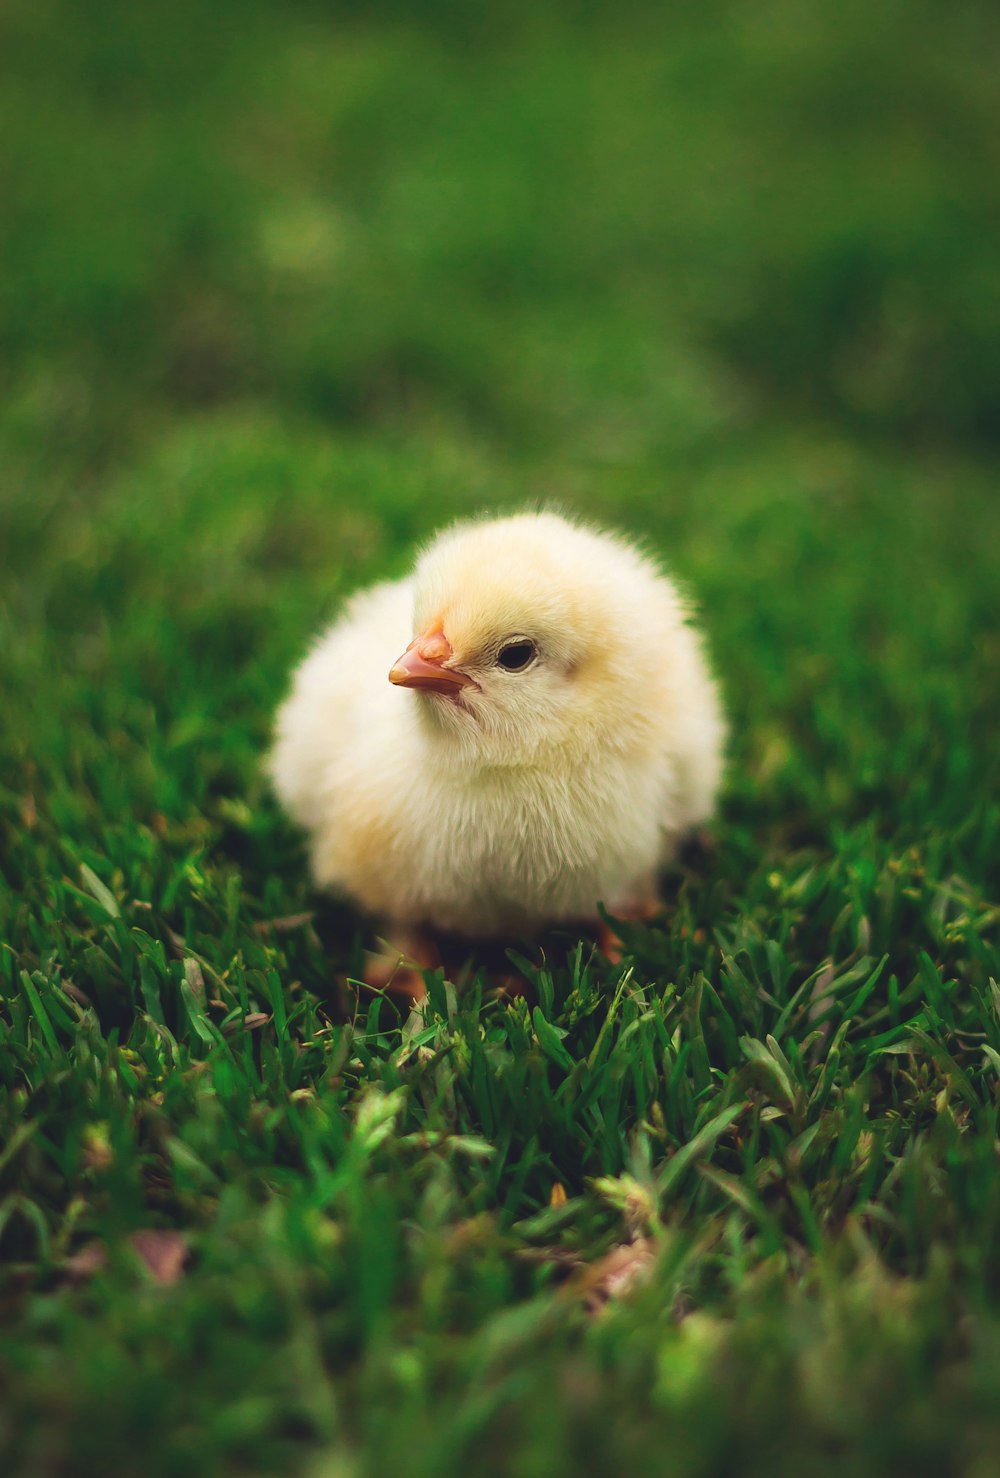 yellow chick on green grass during daytime